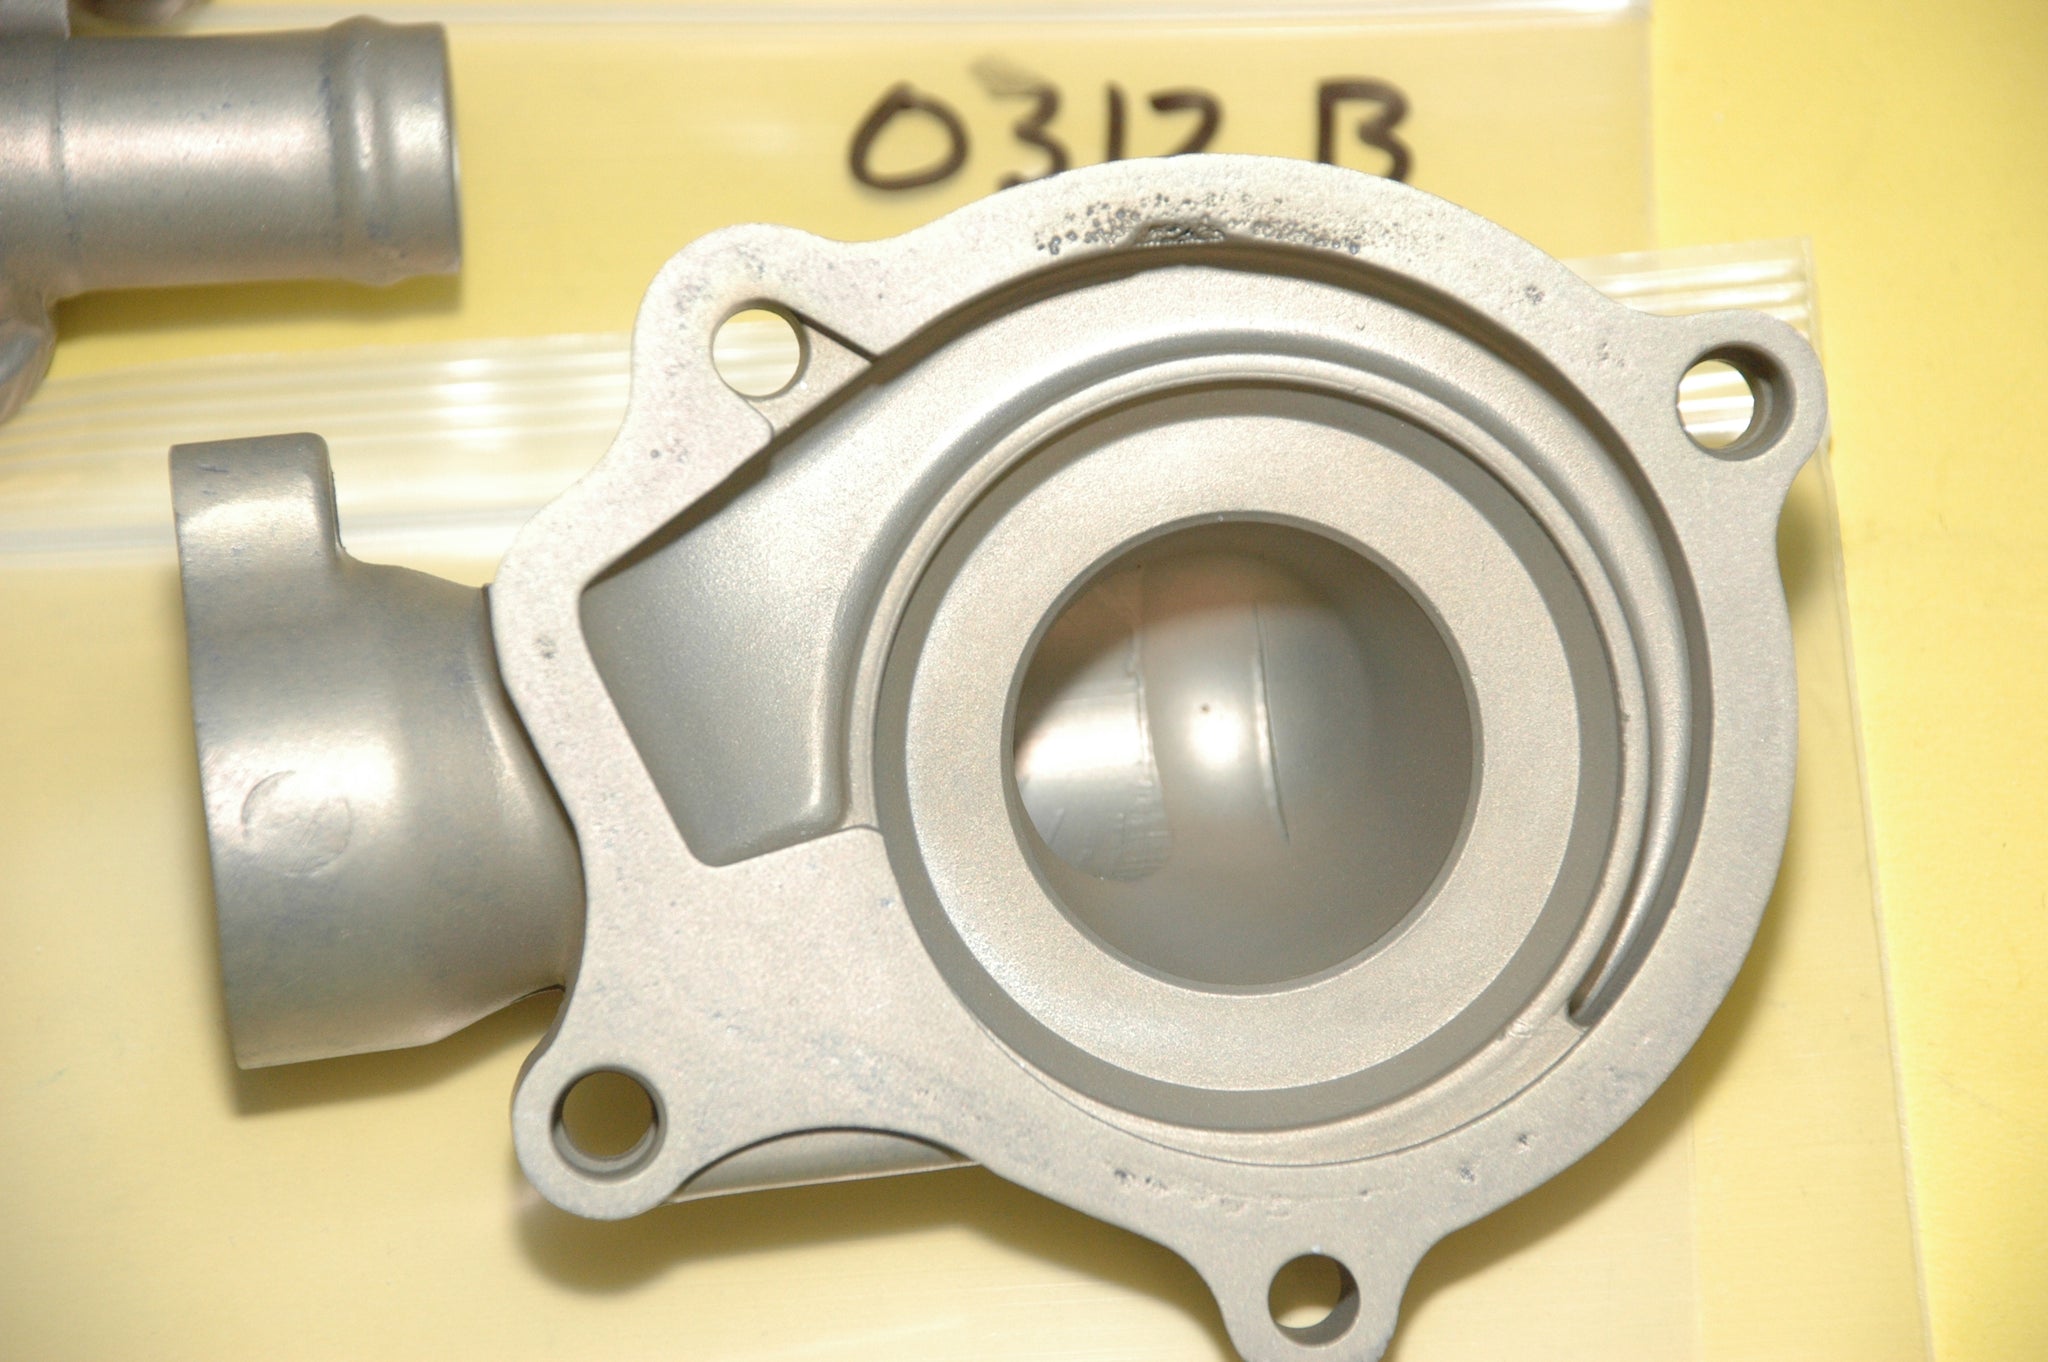 REBUILD YOUR Honda P/N 19200-MM9-000  Water Pump Fits  VT600 88 Shadow Only 0312B